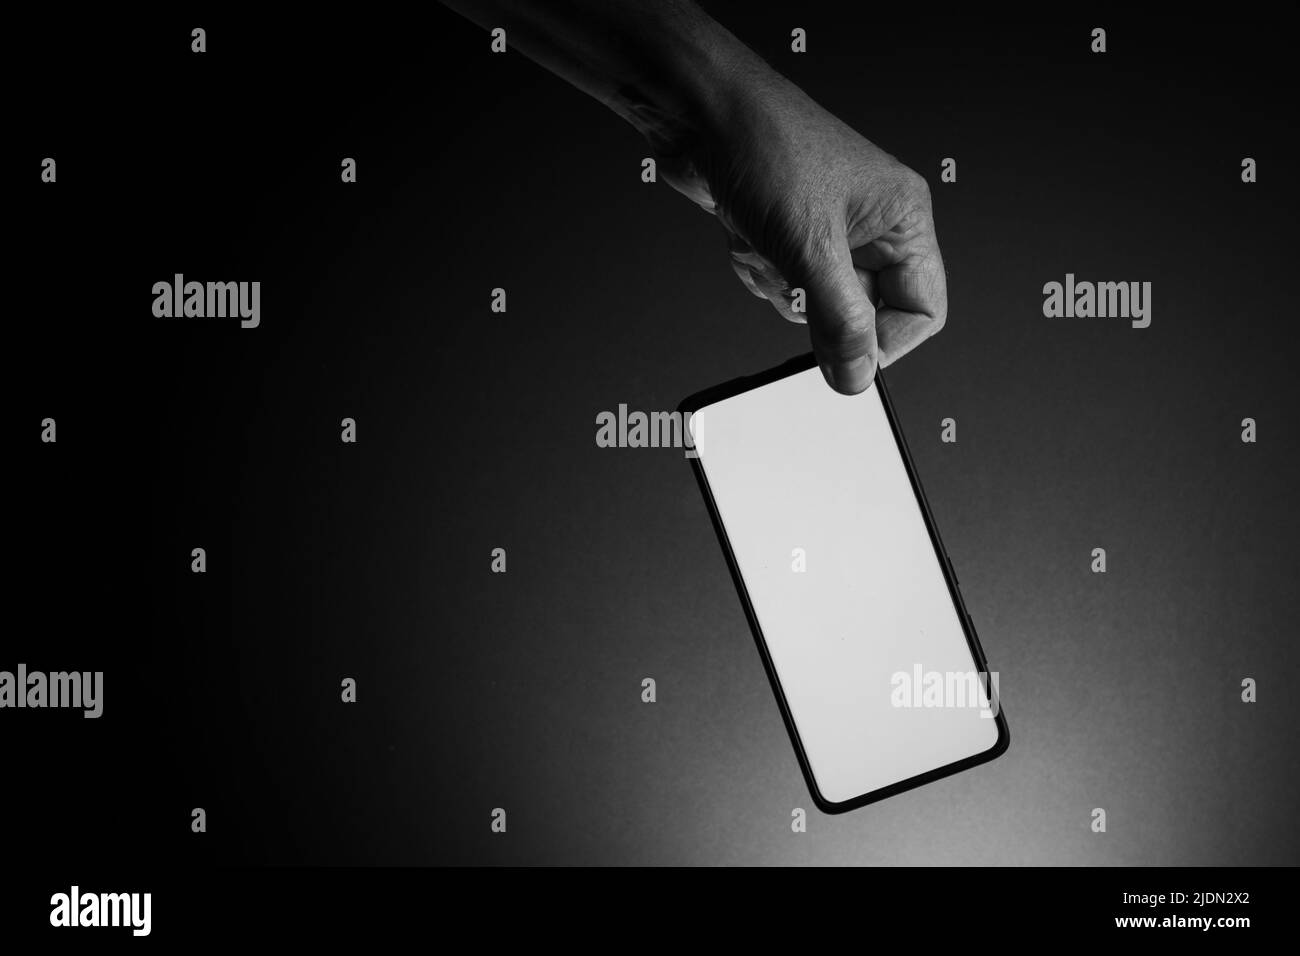 Black and white image of man's hand holding black smartphone with blank white screen isolated on dark background with dramatic lighting and copy space Stock Photo